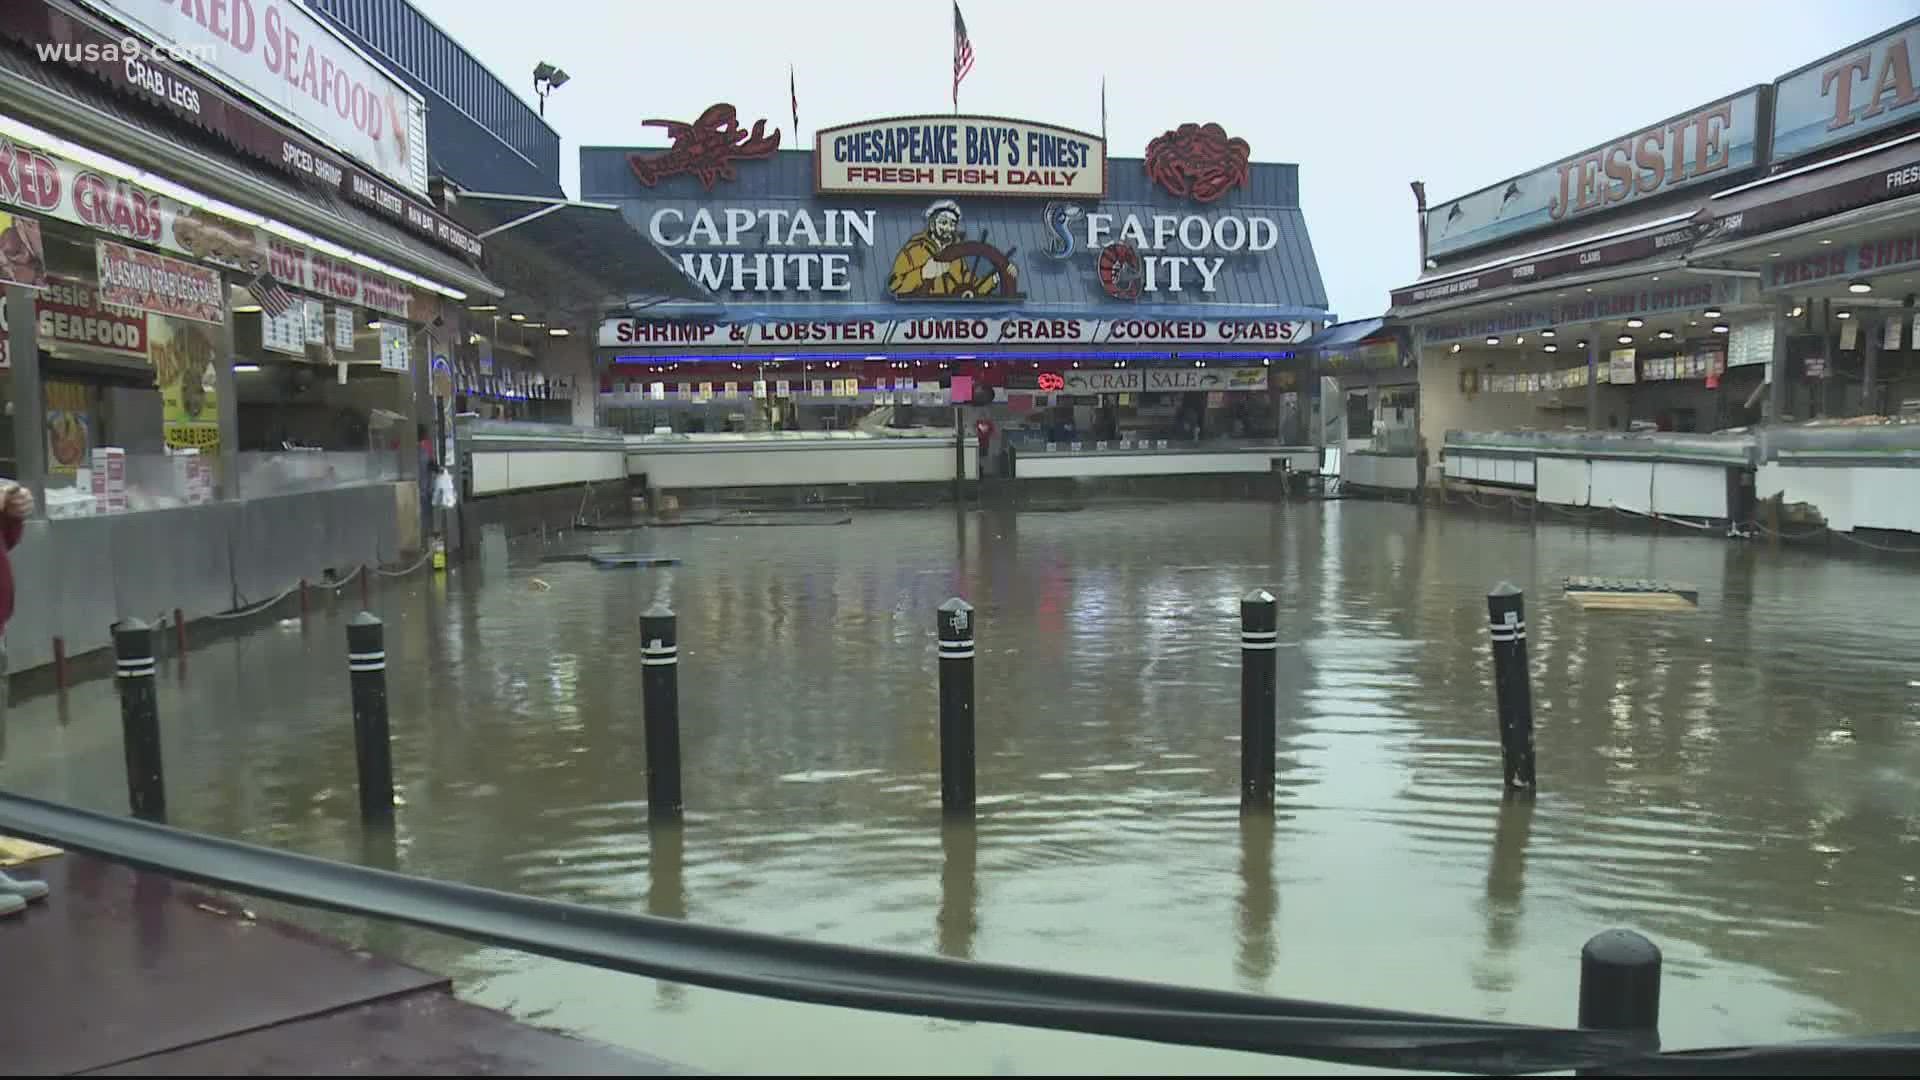 Despite the high waters, some customers were out to get their seafood, rain or shine.